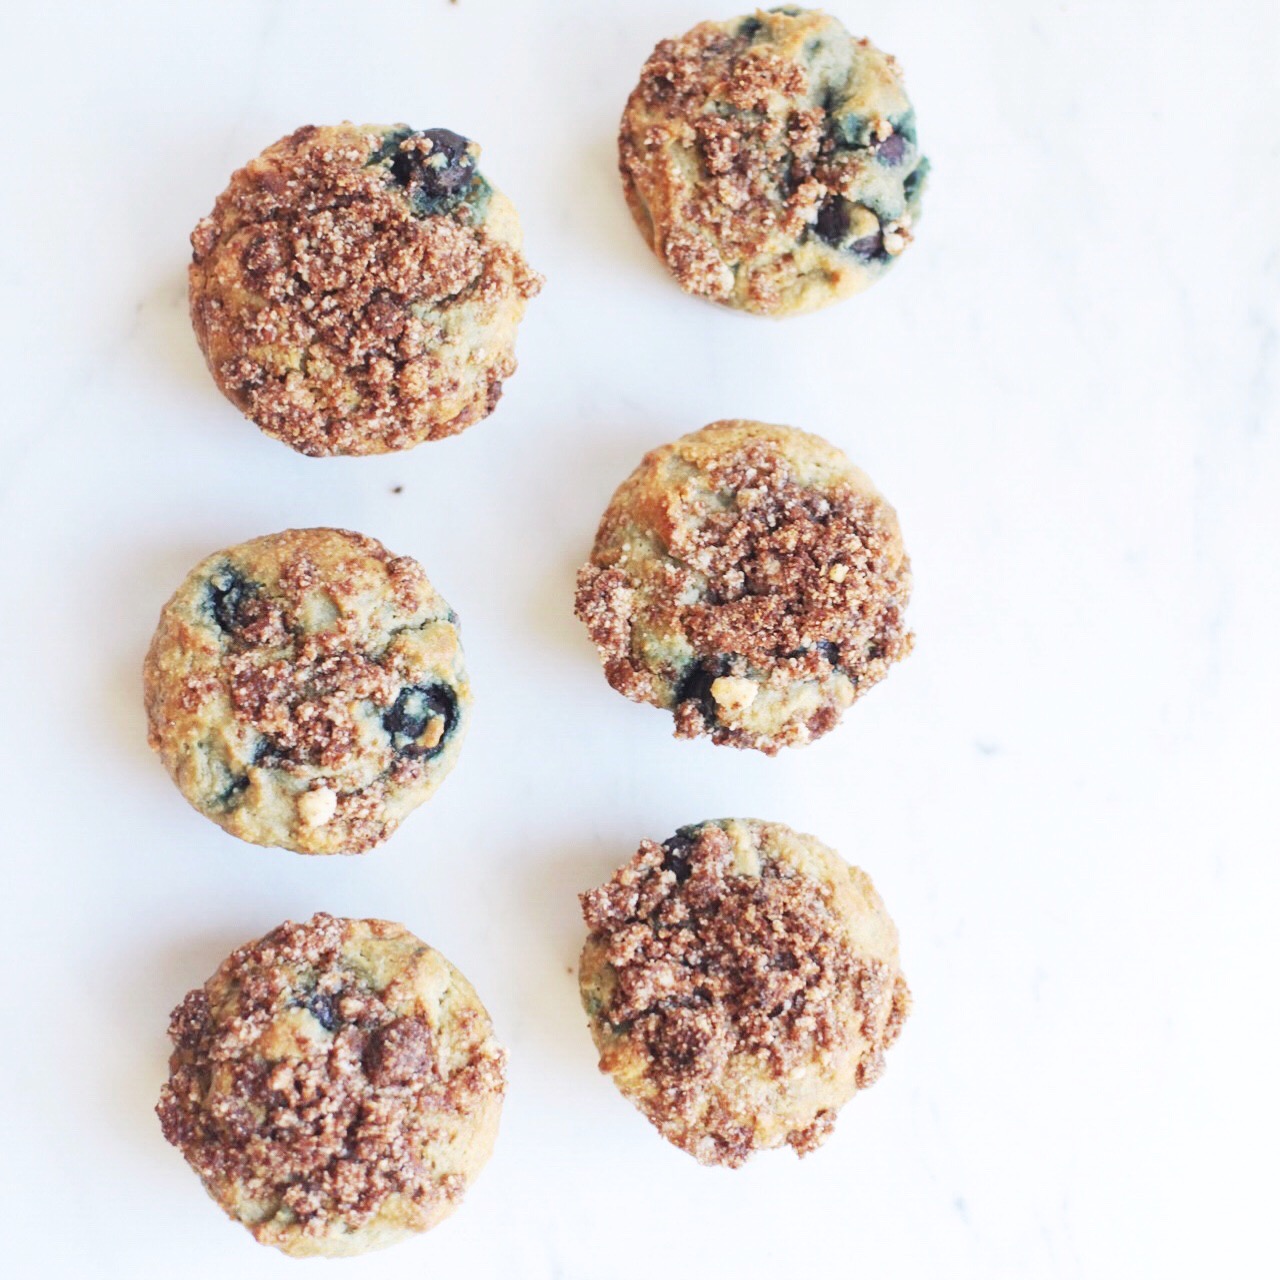 These Grain-Free Blueberry Muffins are paleo-friendly and are absolutely delicious. They are light, perfectly sweet, and freeze well for meal prep!